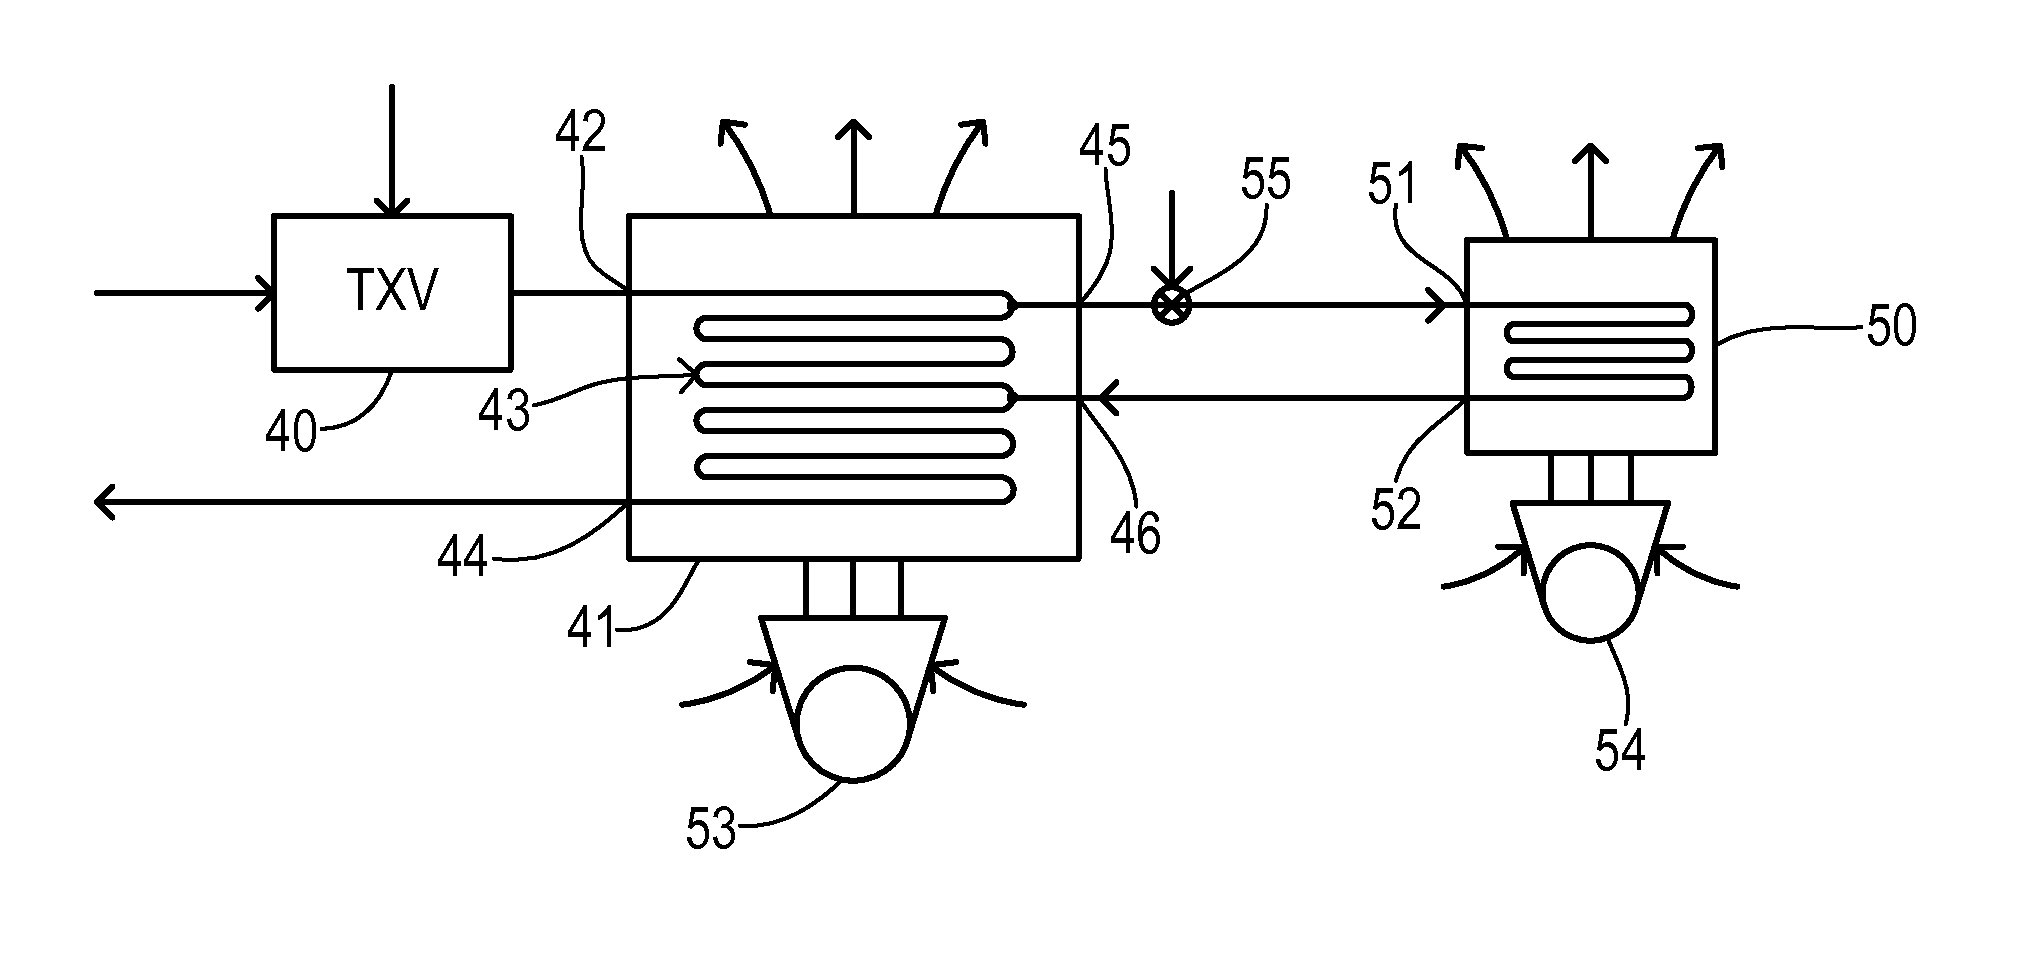 Air conditioner with series/parallel secondary evaporator and single expansion valve